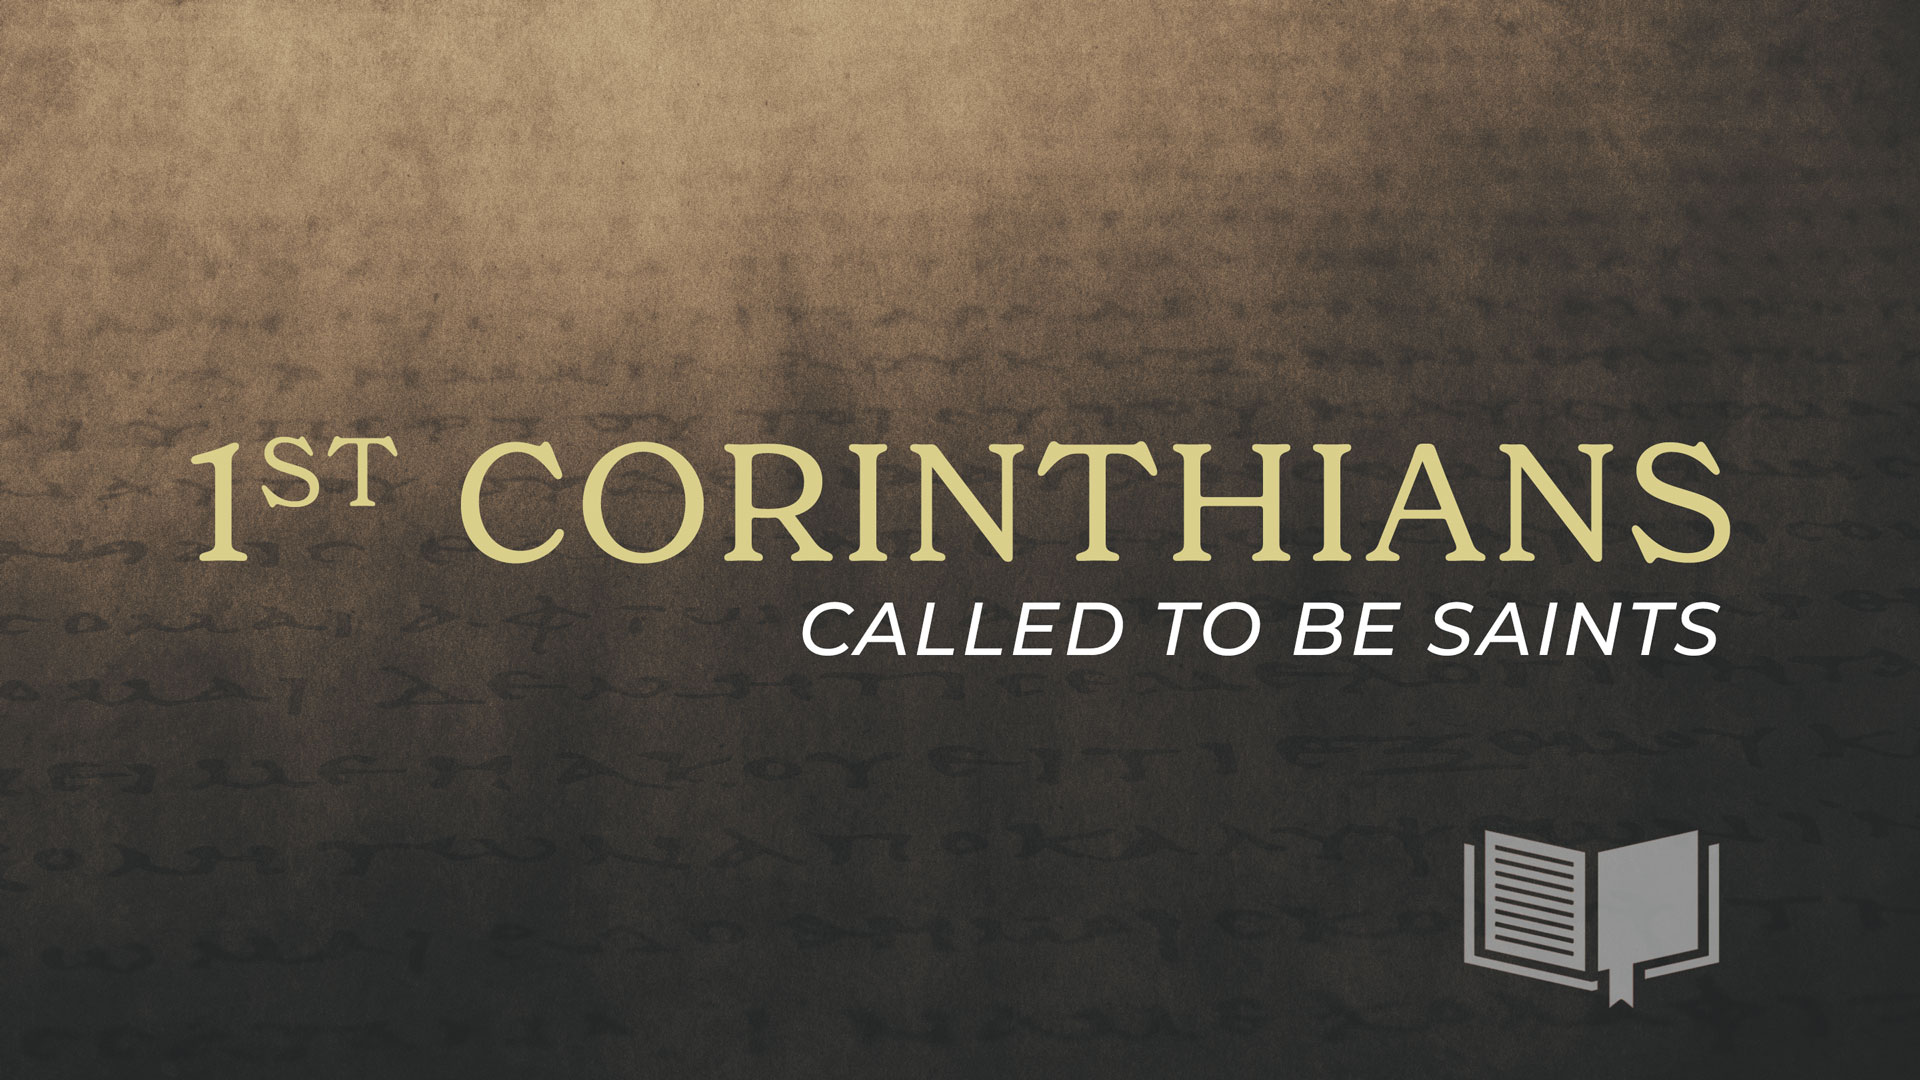 Freedom, Sexuality, and the Glory of God, Part 4  (1 Corinthians 6:12-20)